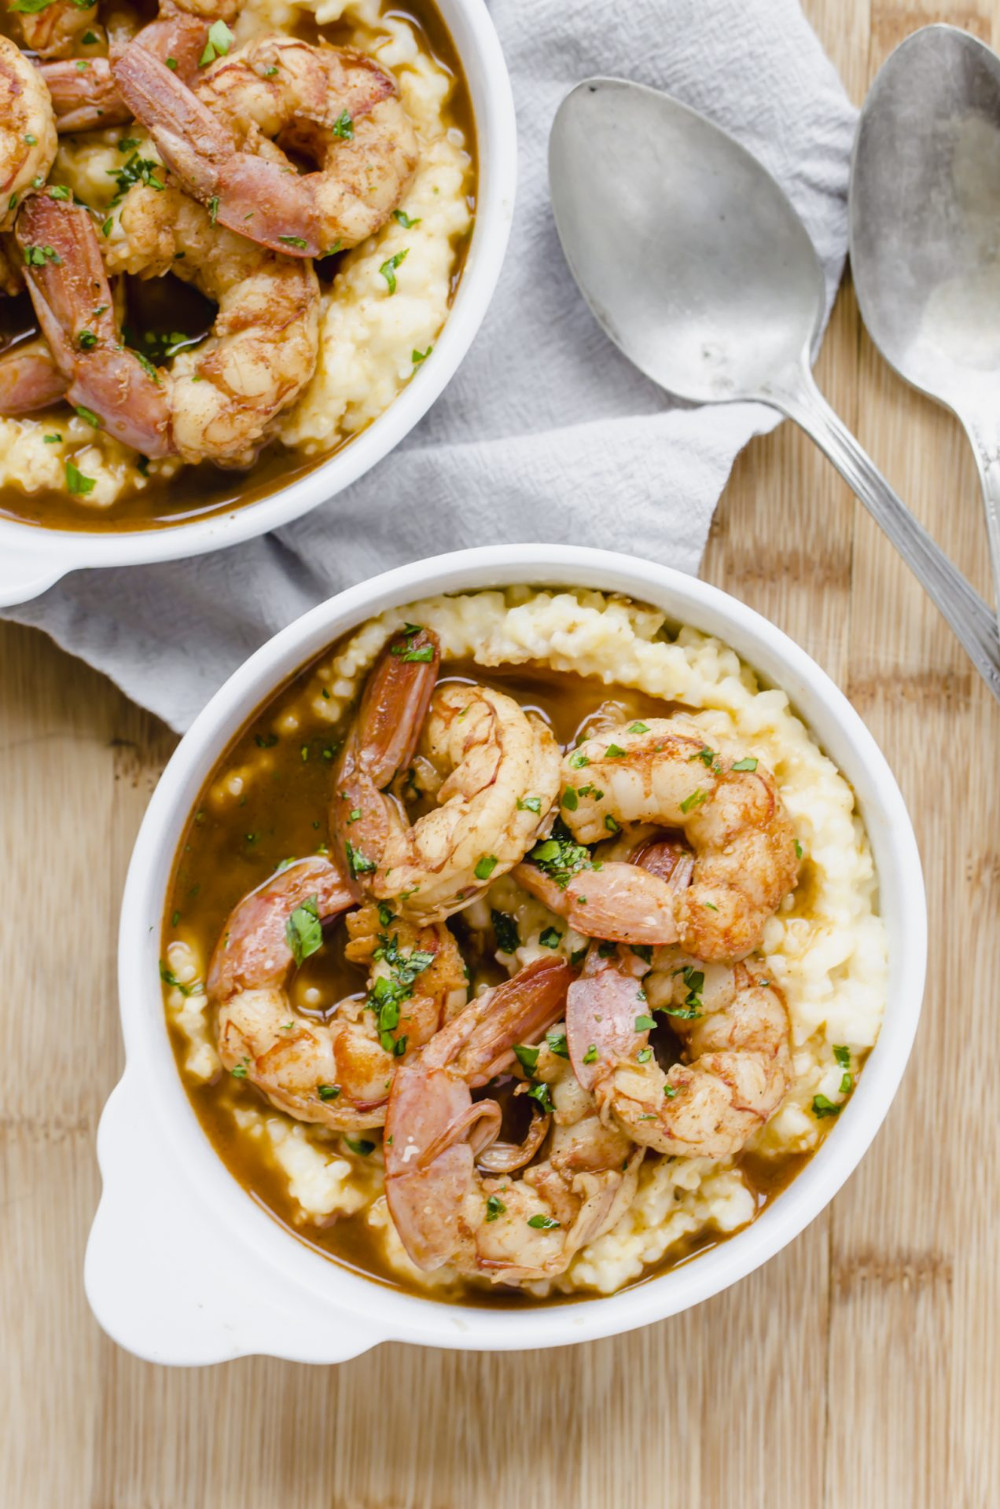 New Orleans Bbq Shrimp And Grits
 New Orleans Style Barbecue Shrimp and Grits